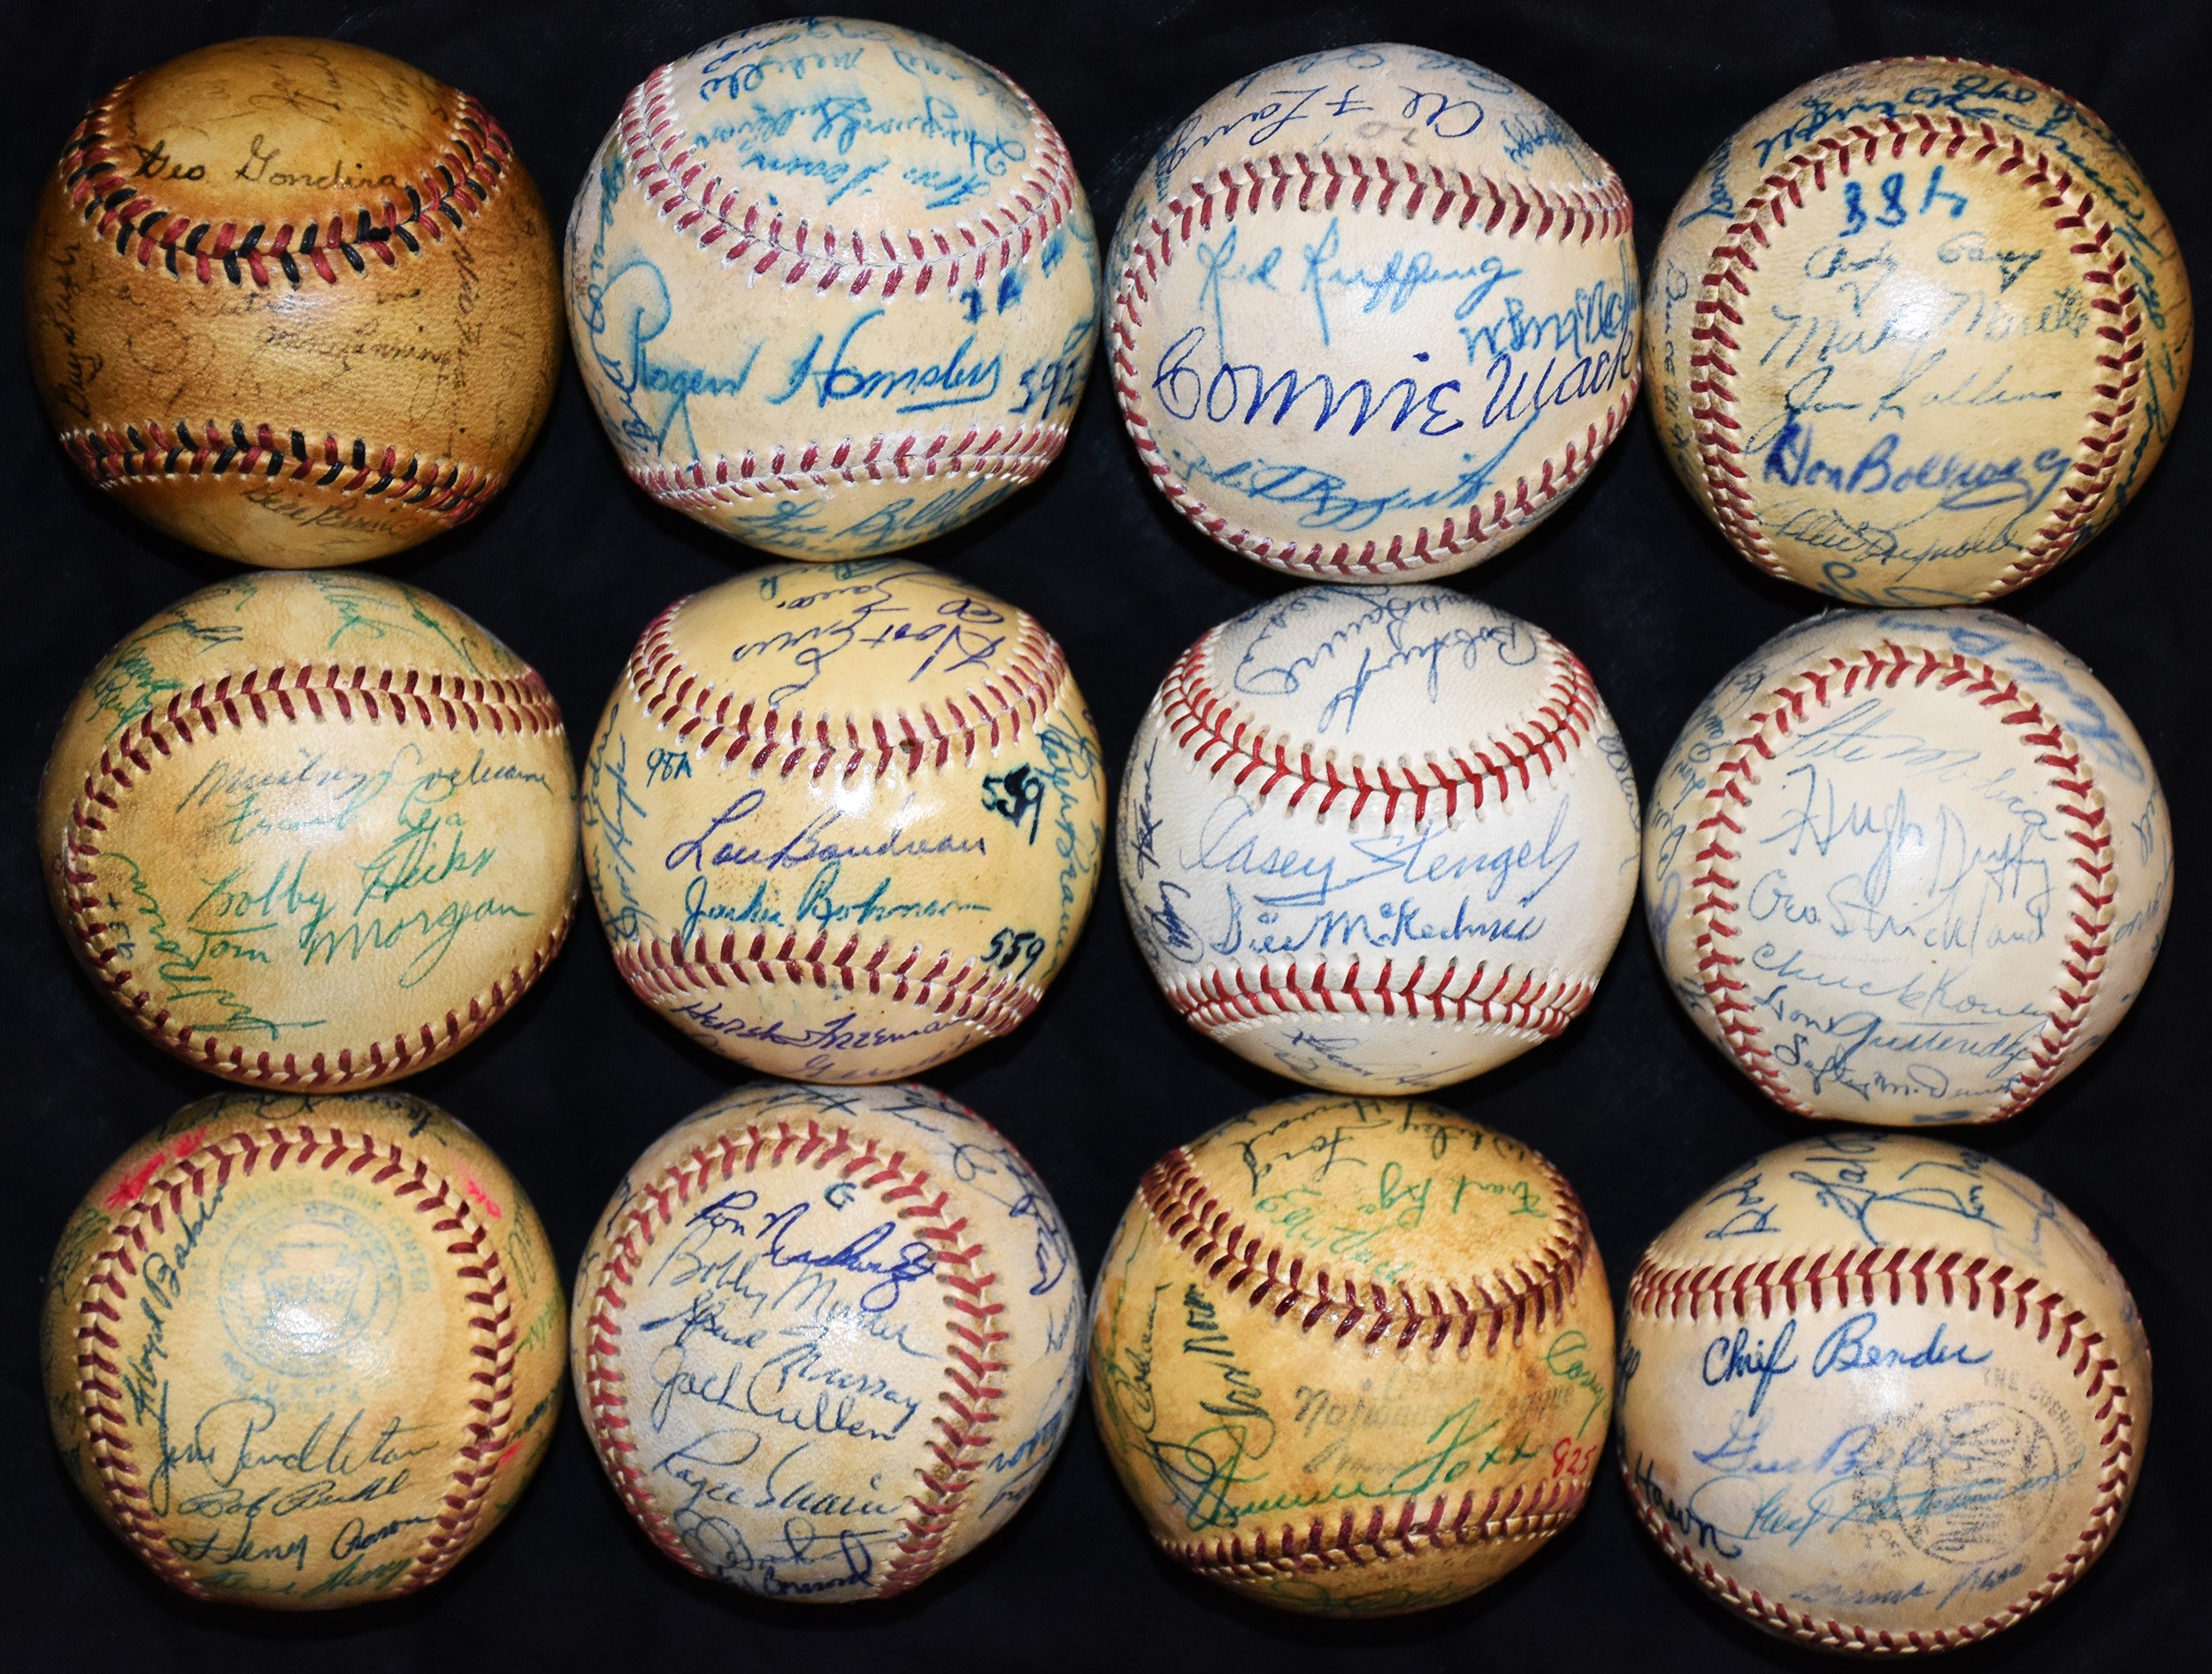 - Incredible 1930s-60s Hall of Fame & Team-Signed Baseball Collection w/Gehrig, Foxx, Hornsby & Robinson (45+)